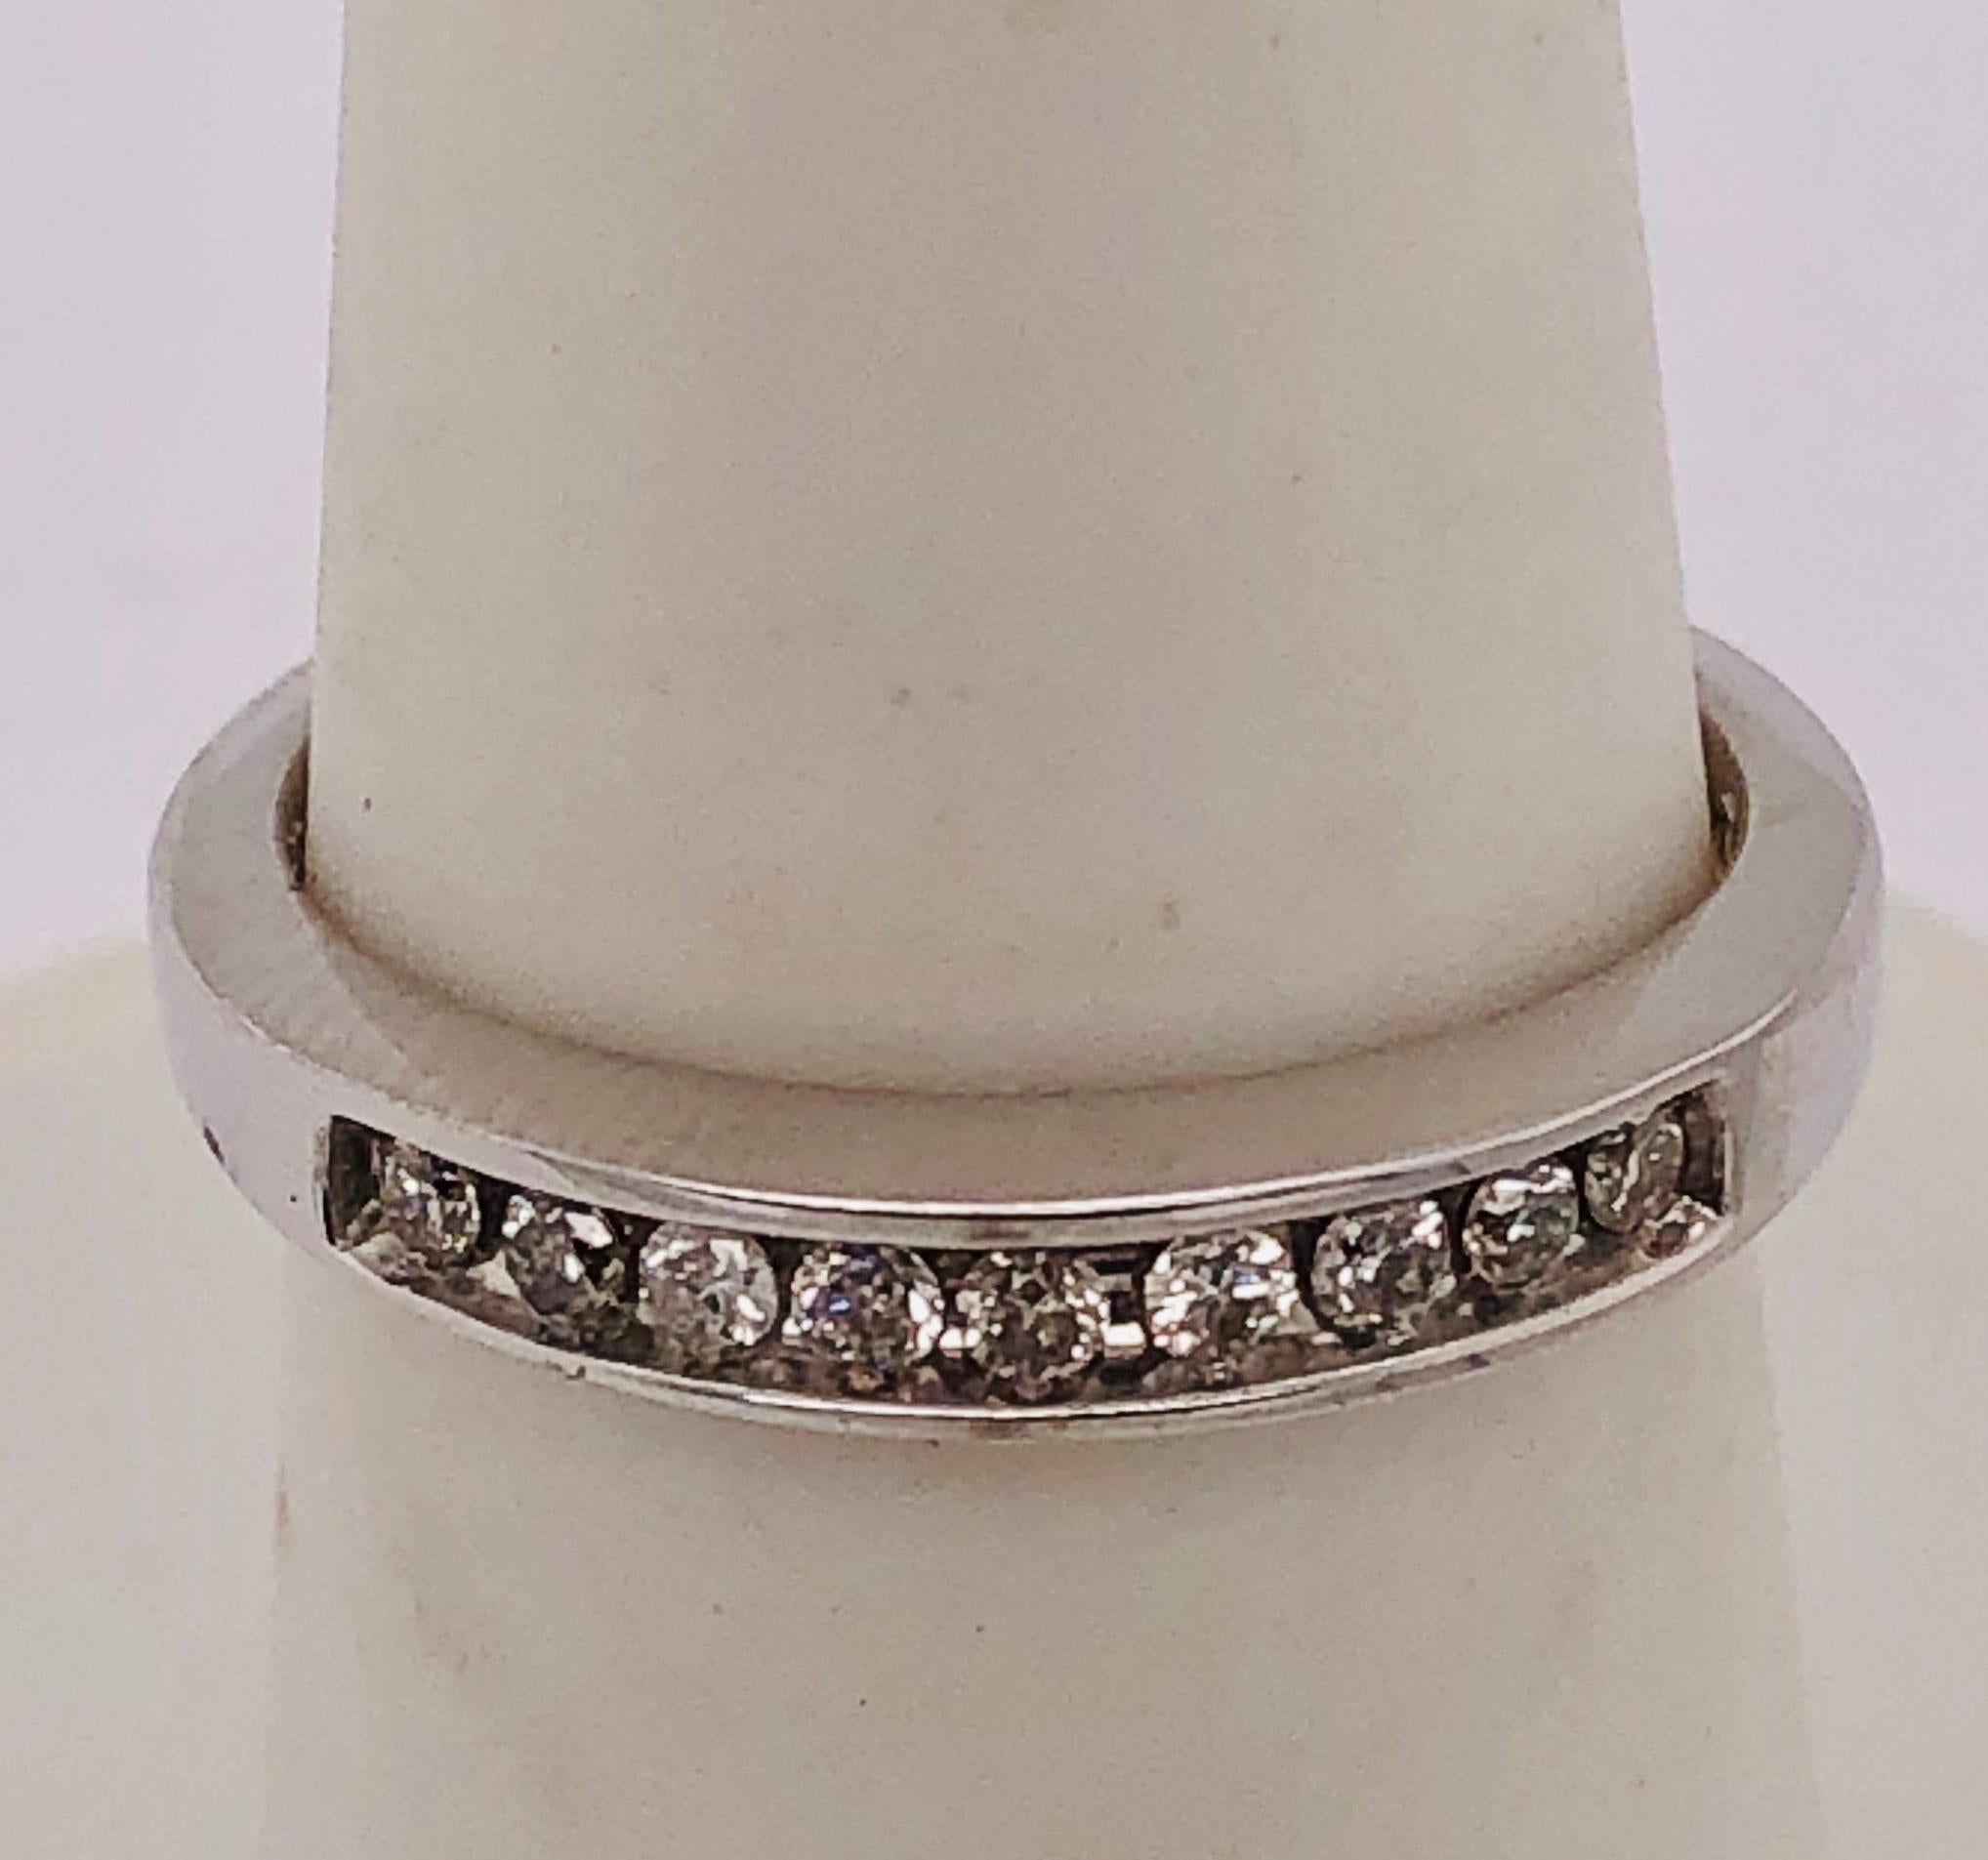 14Kt White Gold Band Ring with Diamonds 0.45 Total Diamond Weight
Size 6.75 with 2.90 grams Total weight

